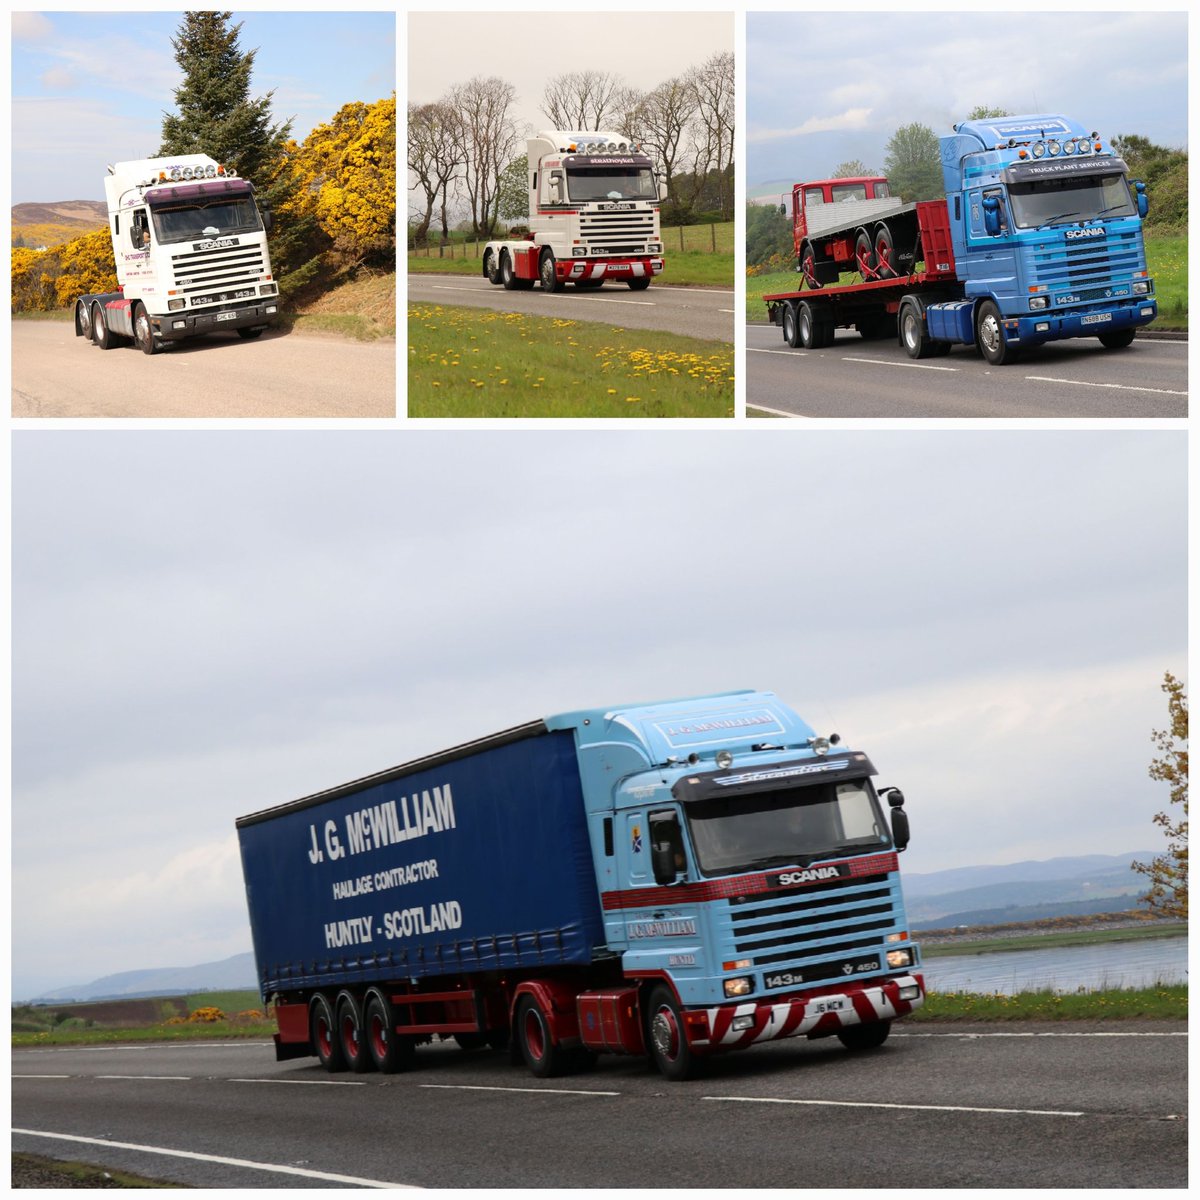 Scania 143m's on this year's Highland Historic Commercial Vehicle Road Run #Scania #143m #v8 #classictruck